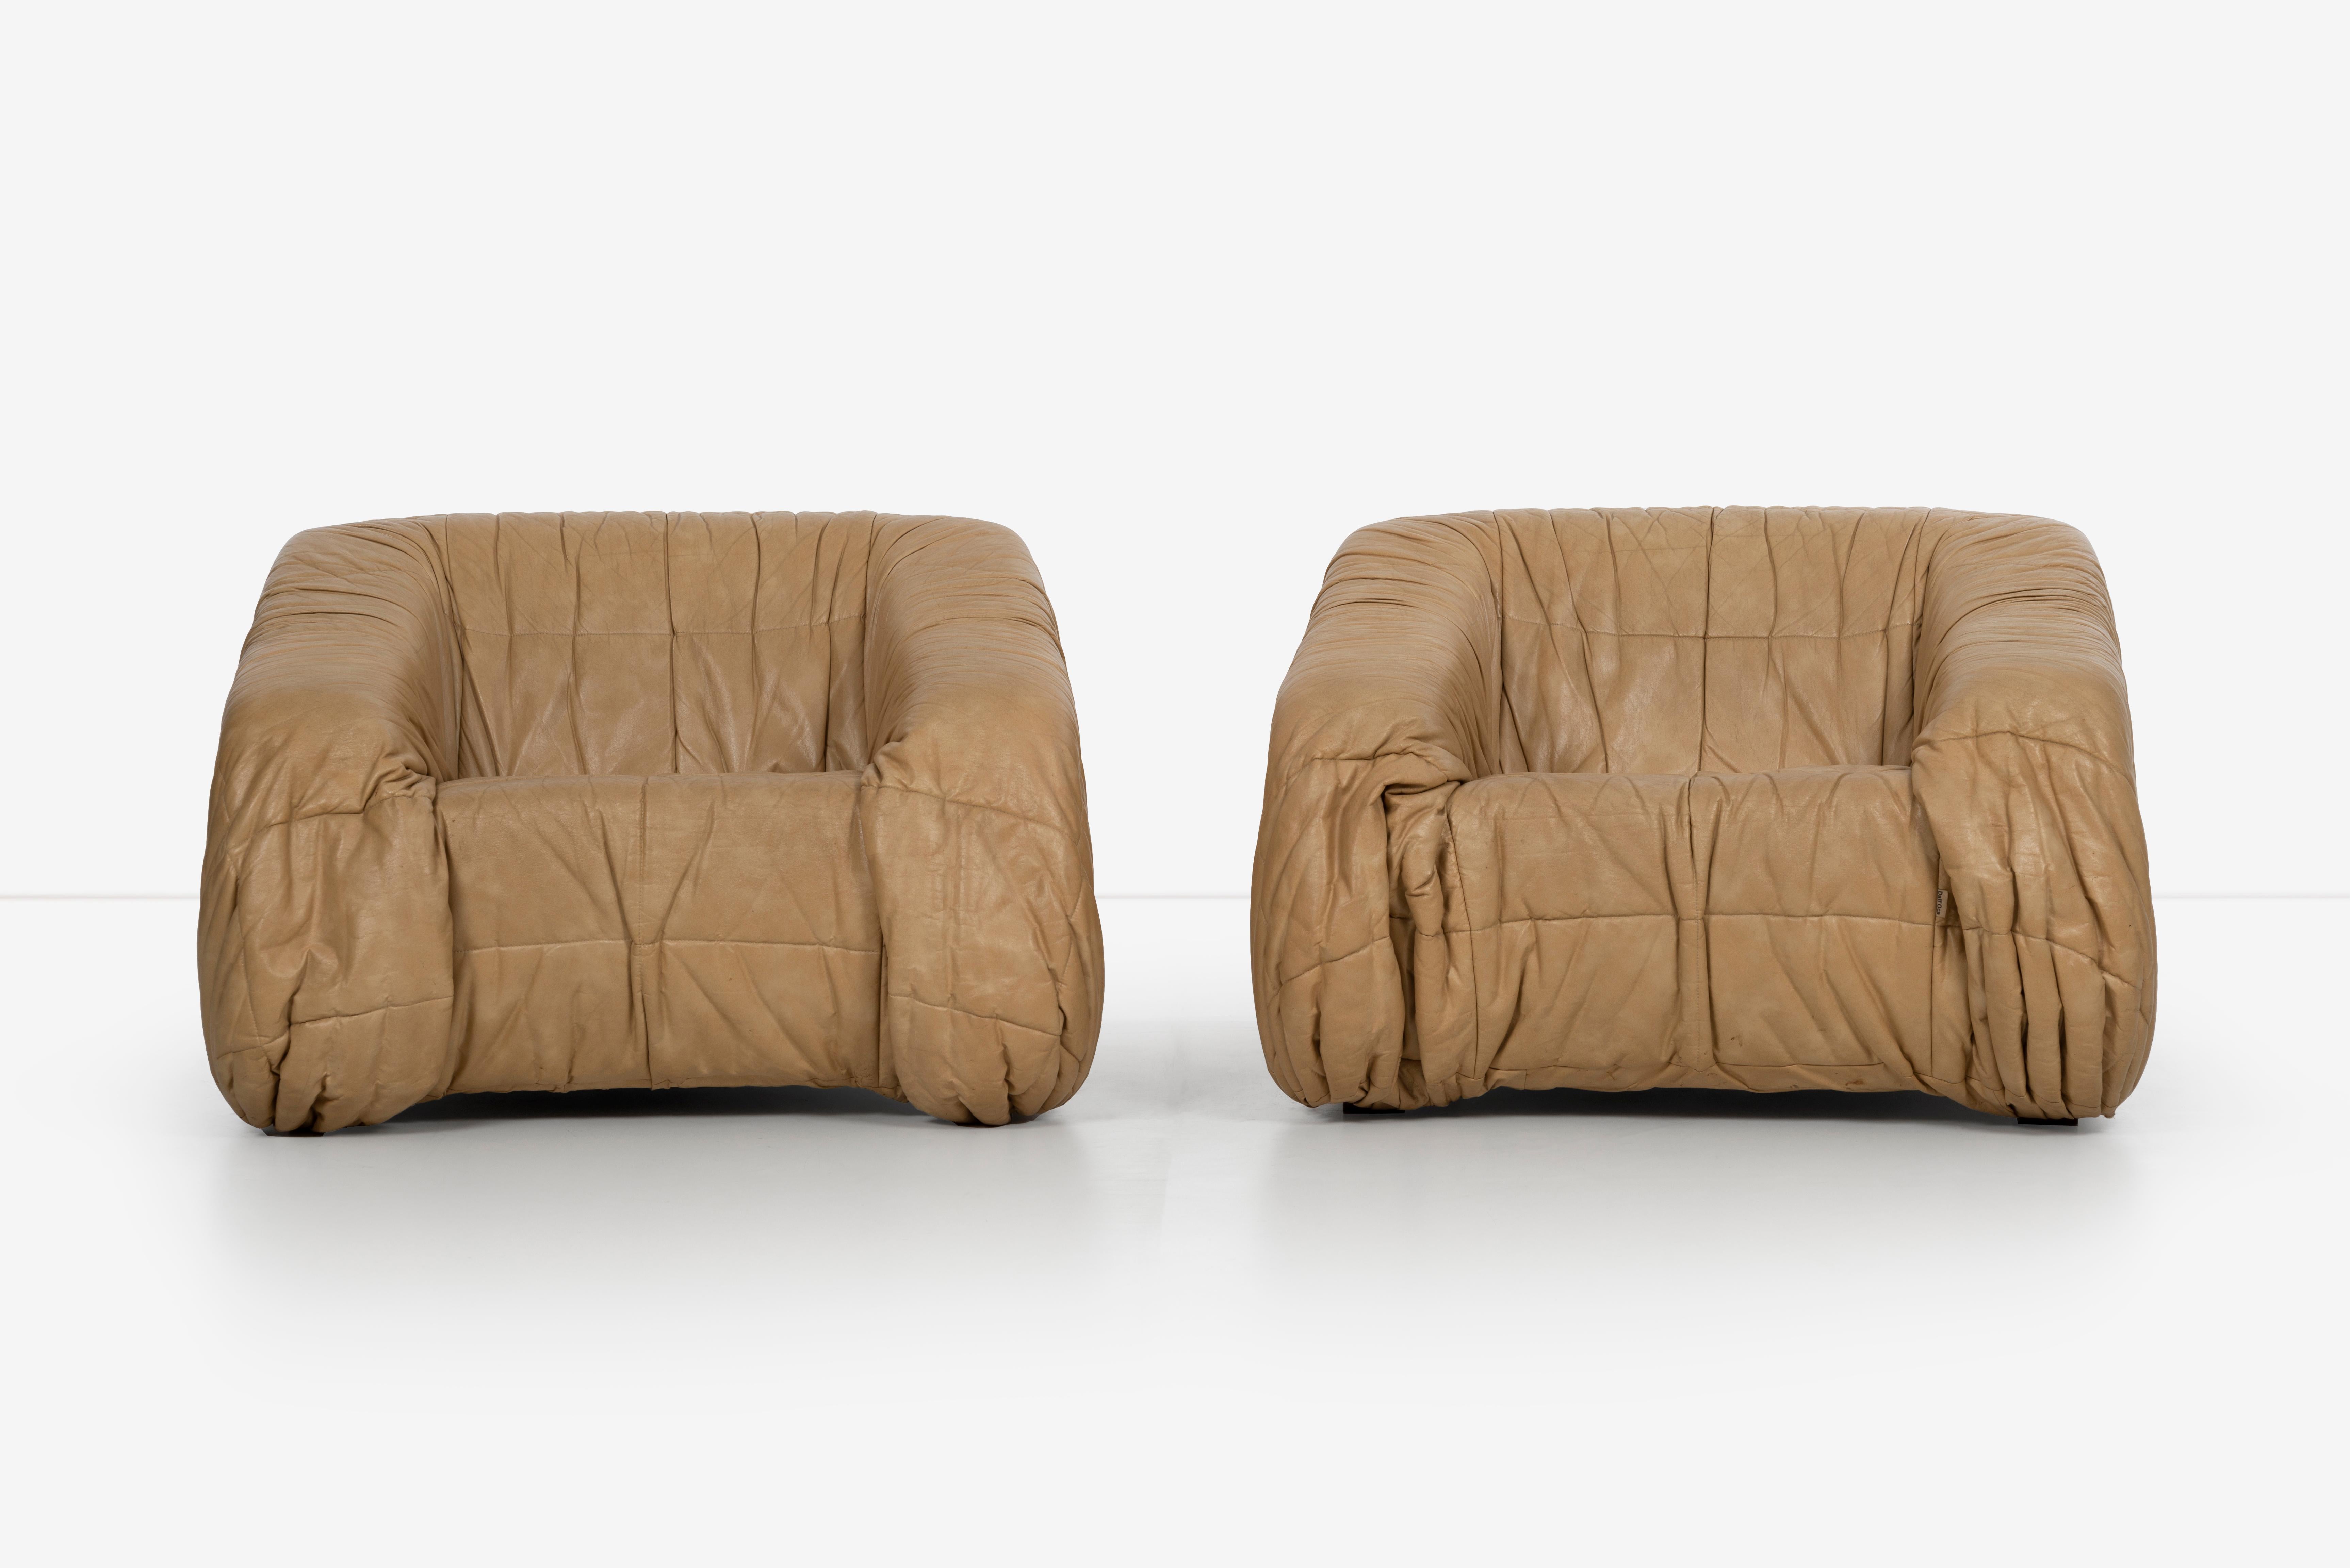 Jonathan de Pas, Donato d'Urbino and Paolo Lomazzi Piumino pair of lounge chairs for Dall'Oca. Quilted vinyl over foam, lacquered beech
Fabric manufacturer's label to seam of each example ‘Dall'Oca’. 



 